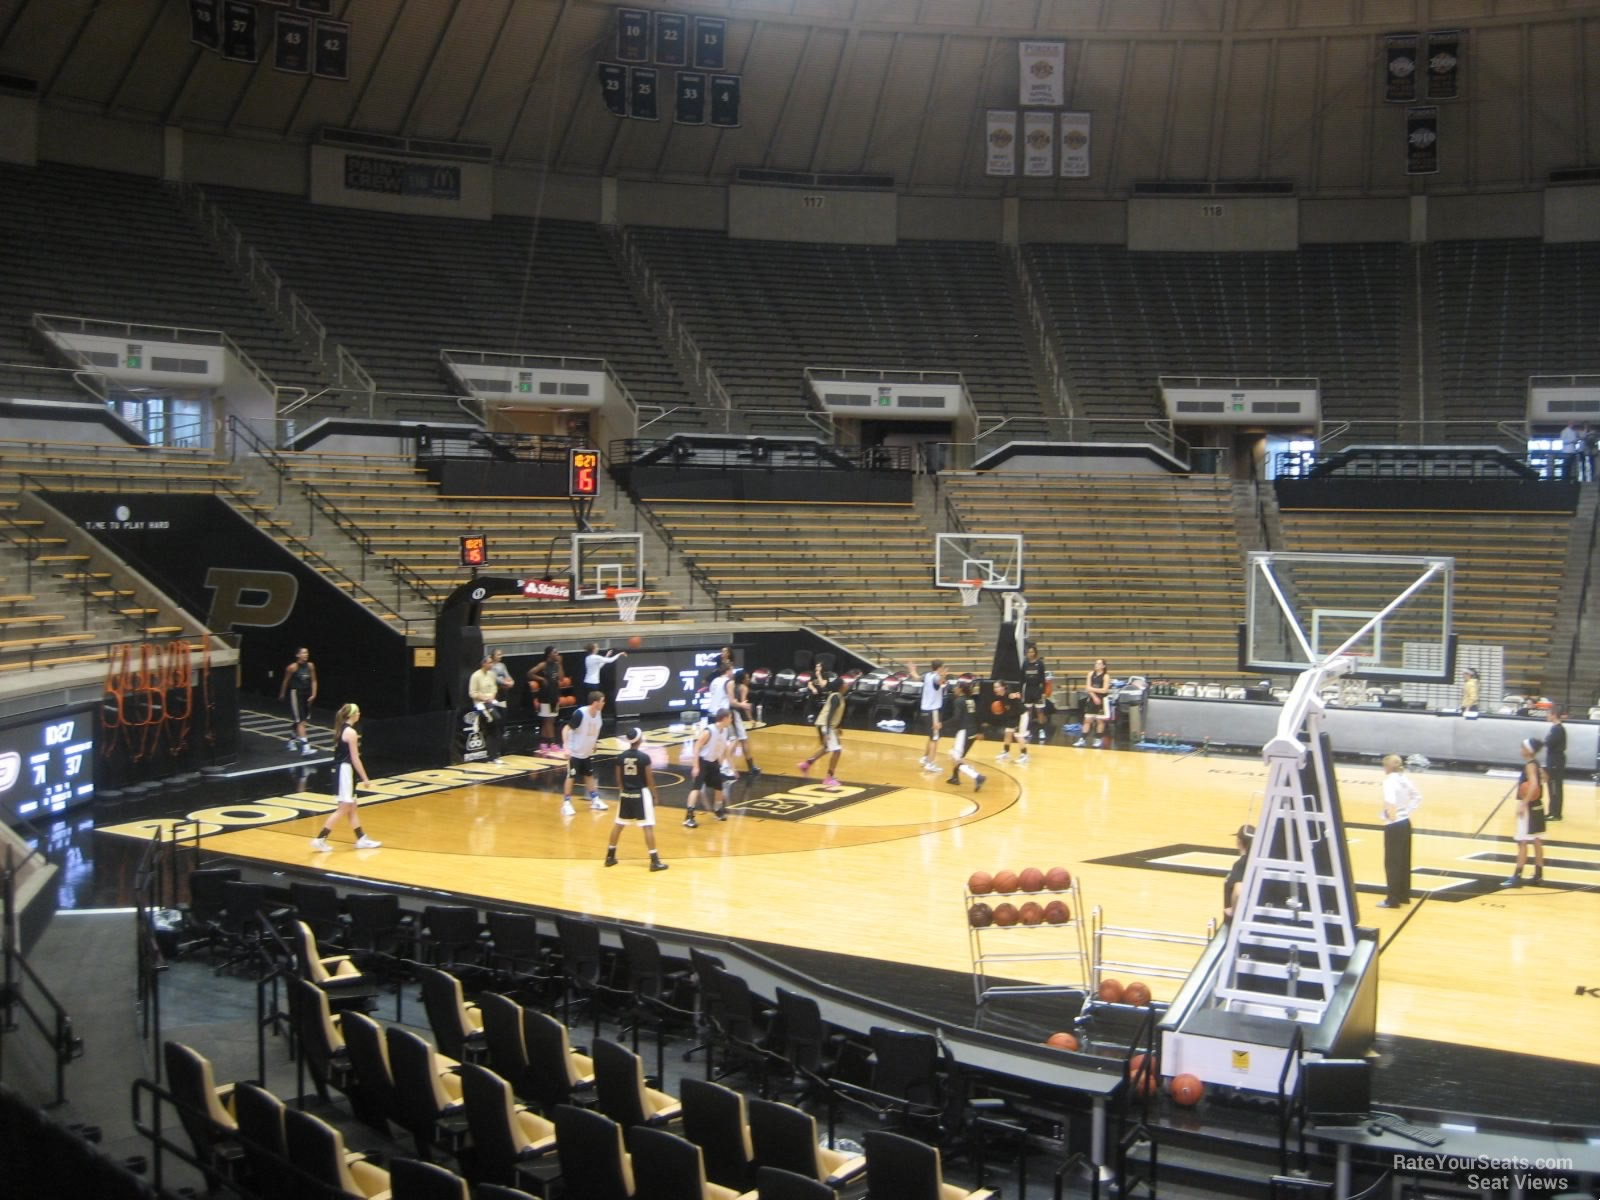 section 9, row g seat view  - mackey arena